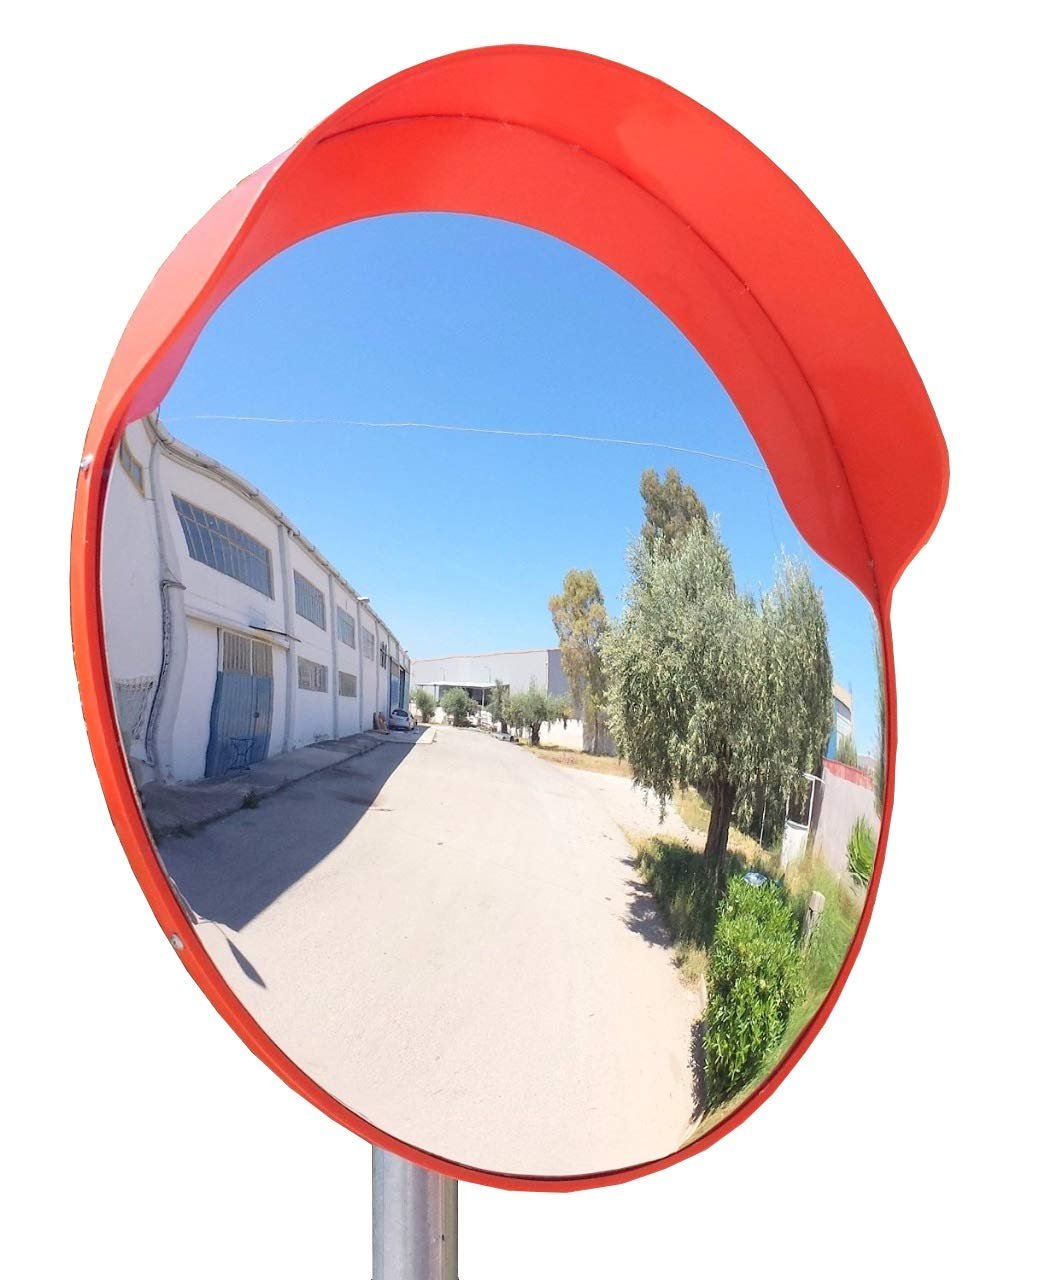 Distributor of Outdoor Road Safety Convex Mirror in UAE